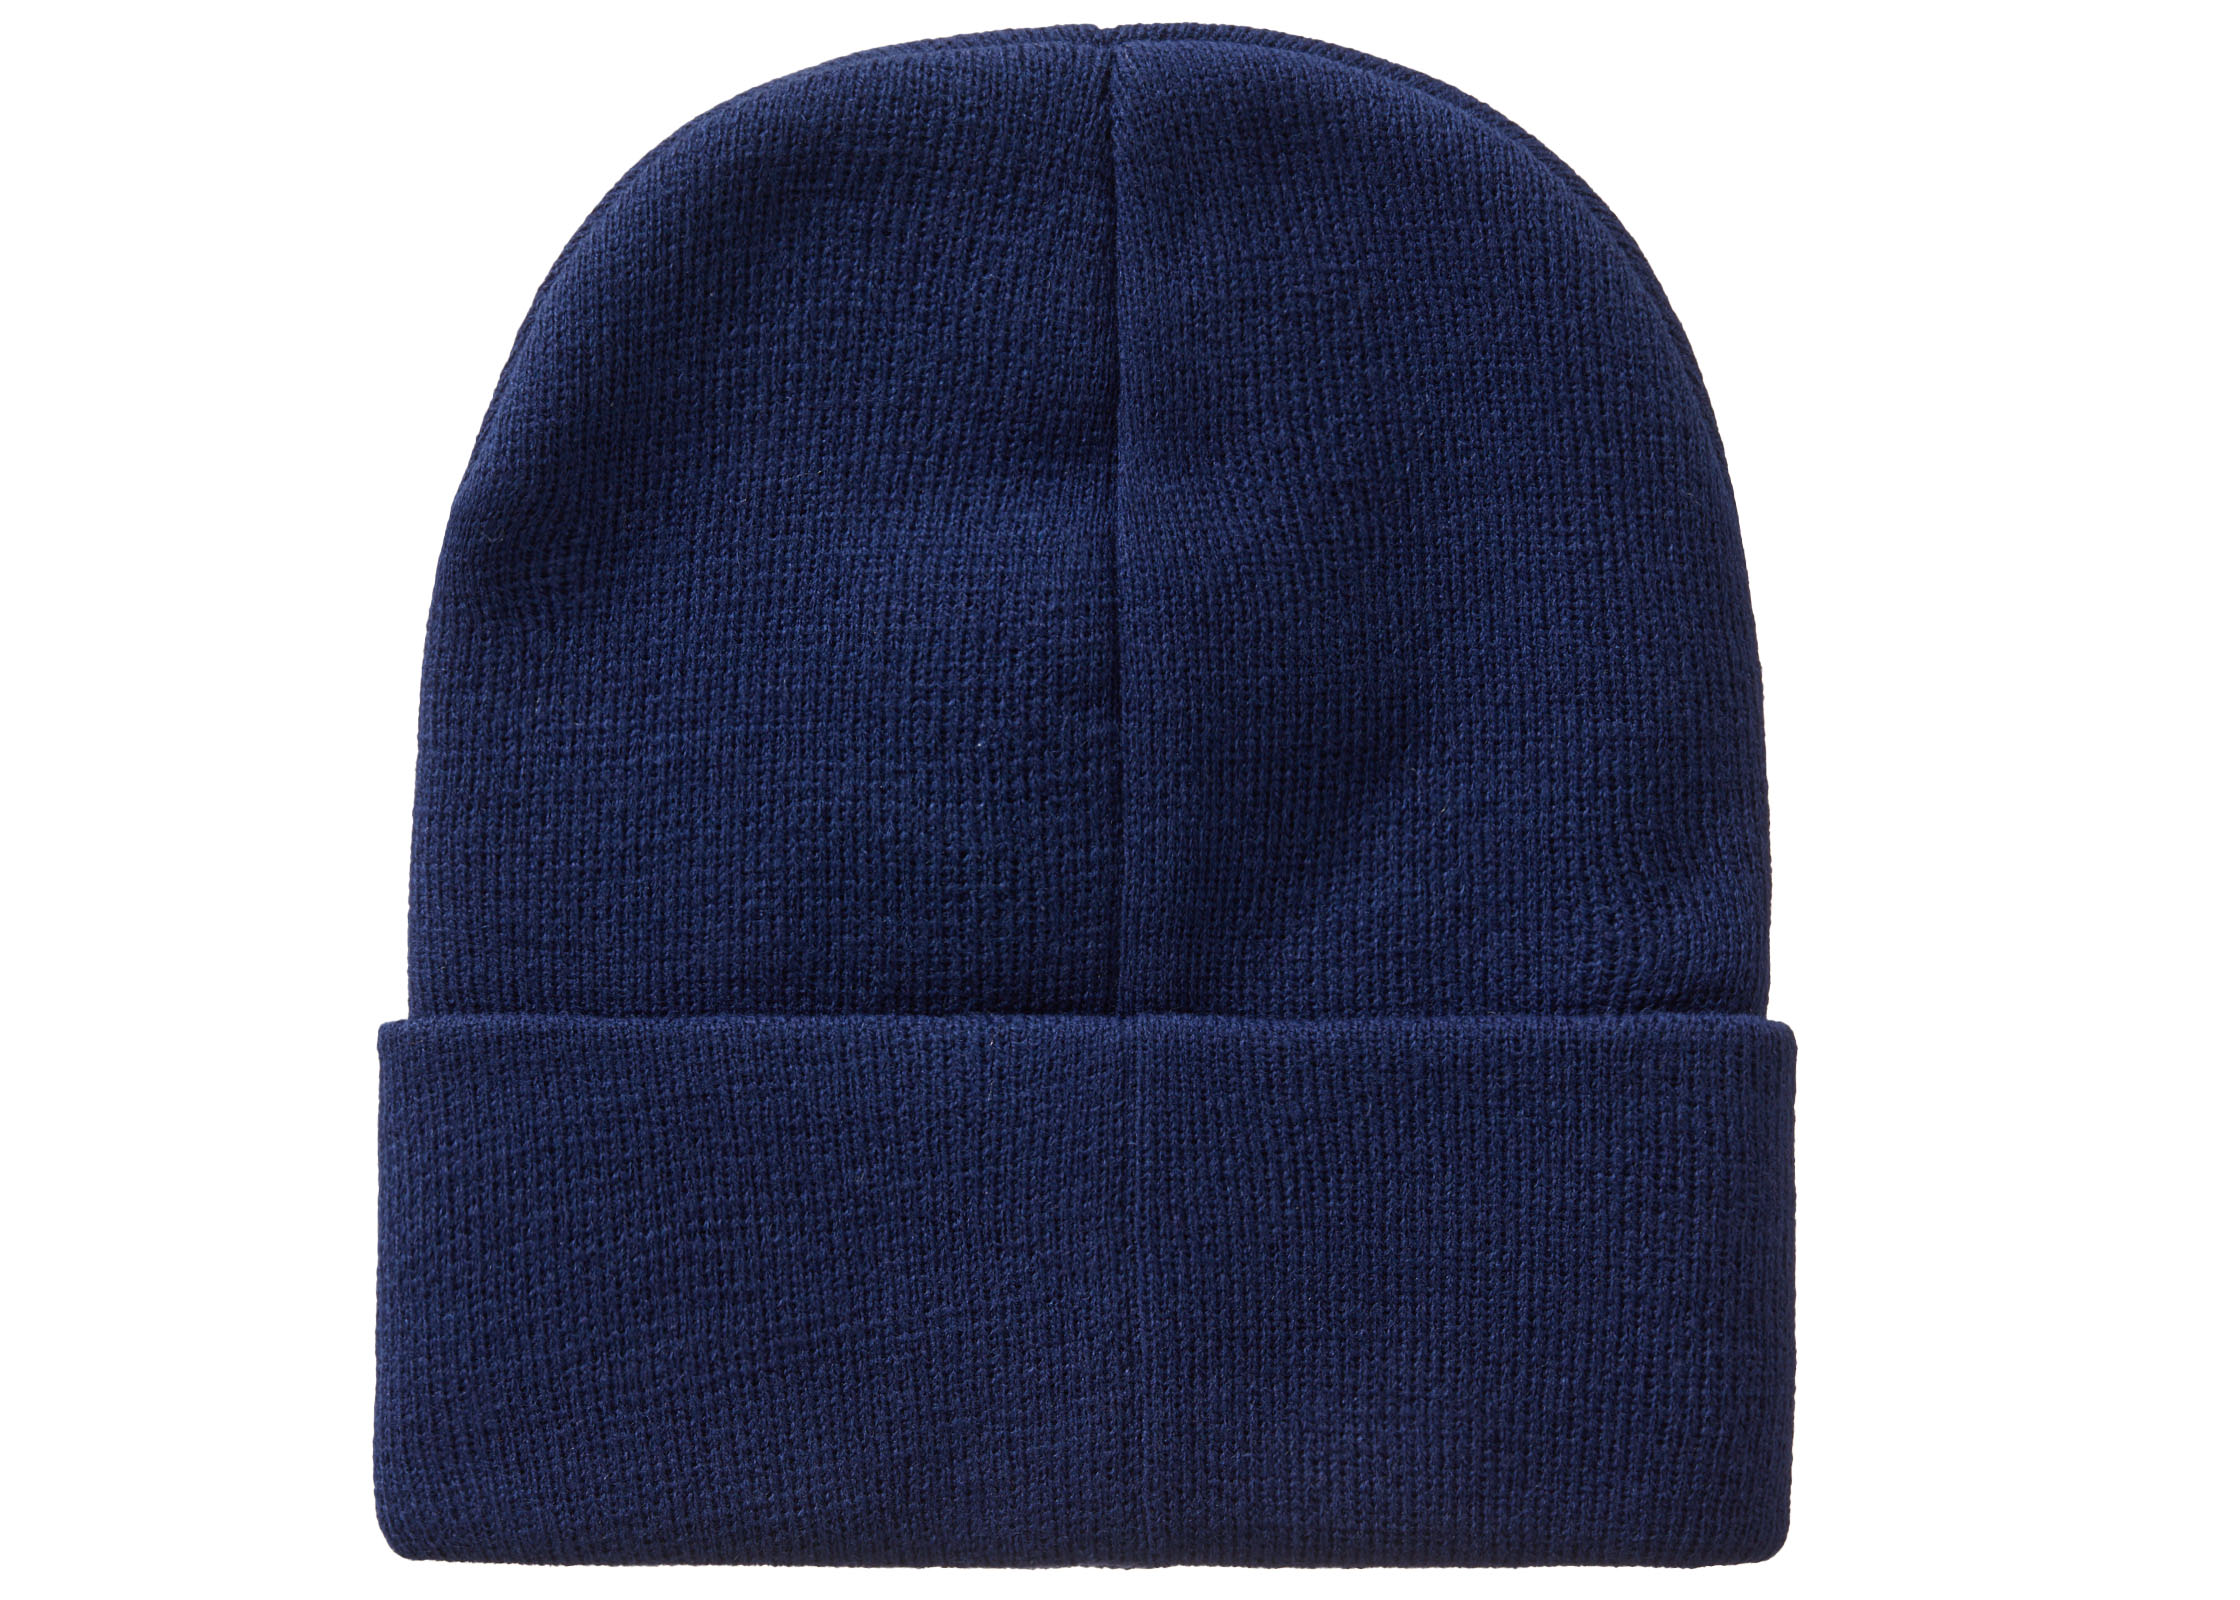 Supreme Peace Embroidered Beanie Navy